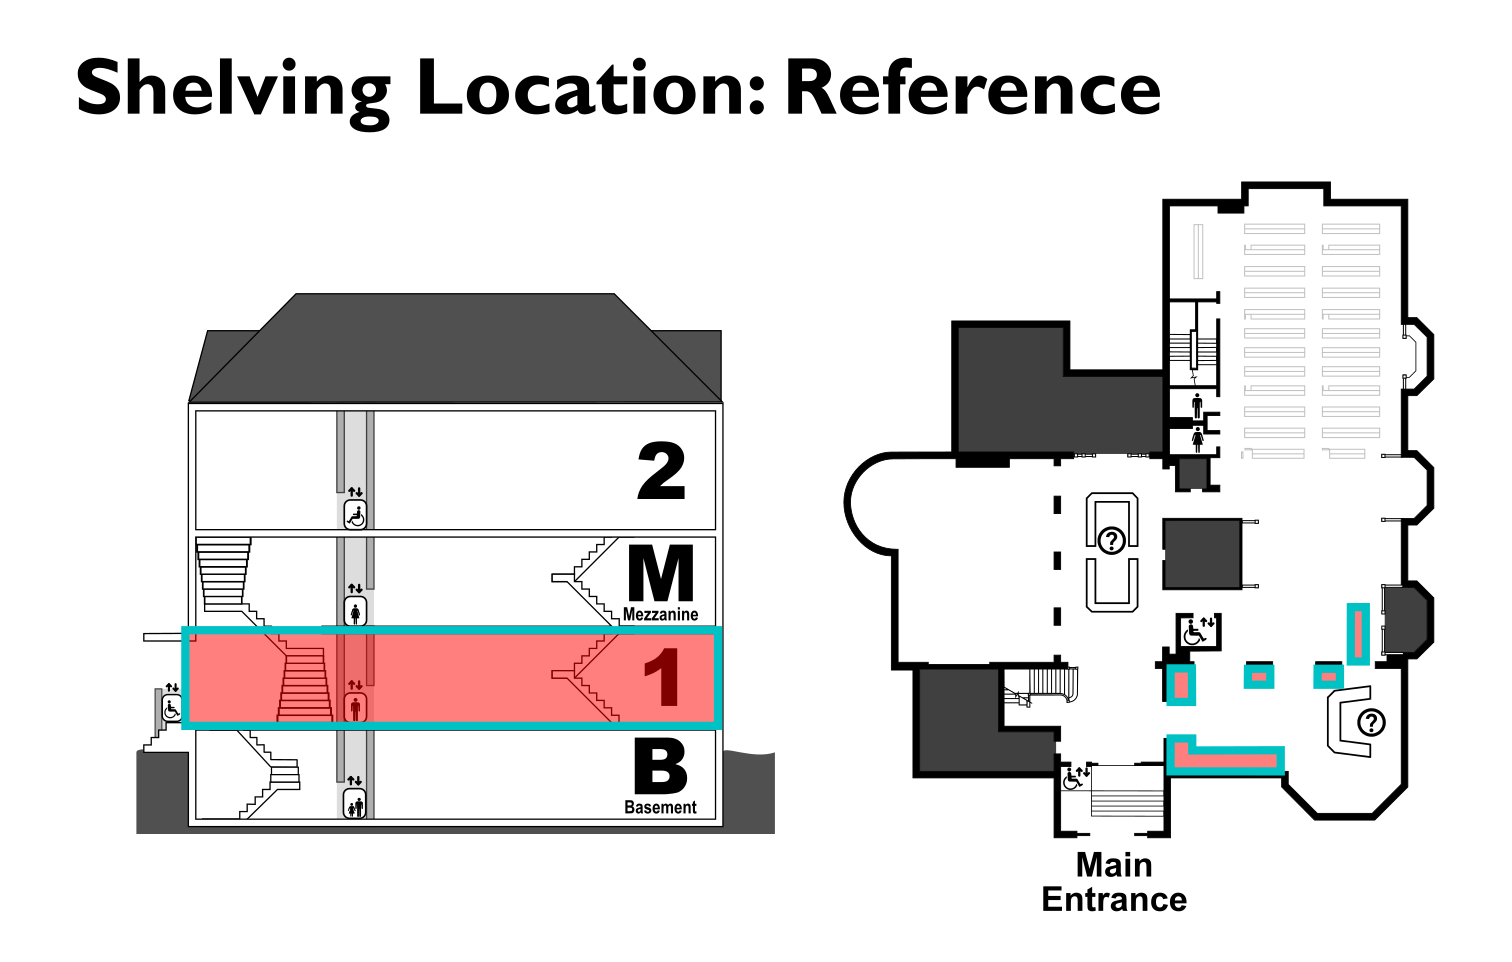 map showing the location of the "Reference" shelving location